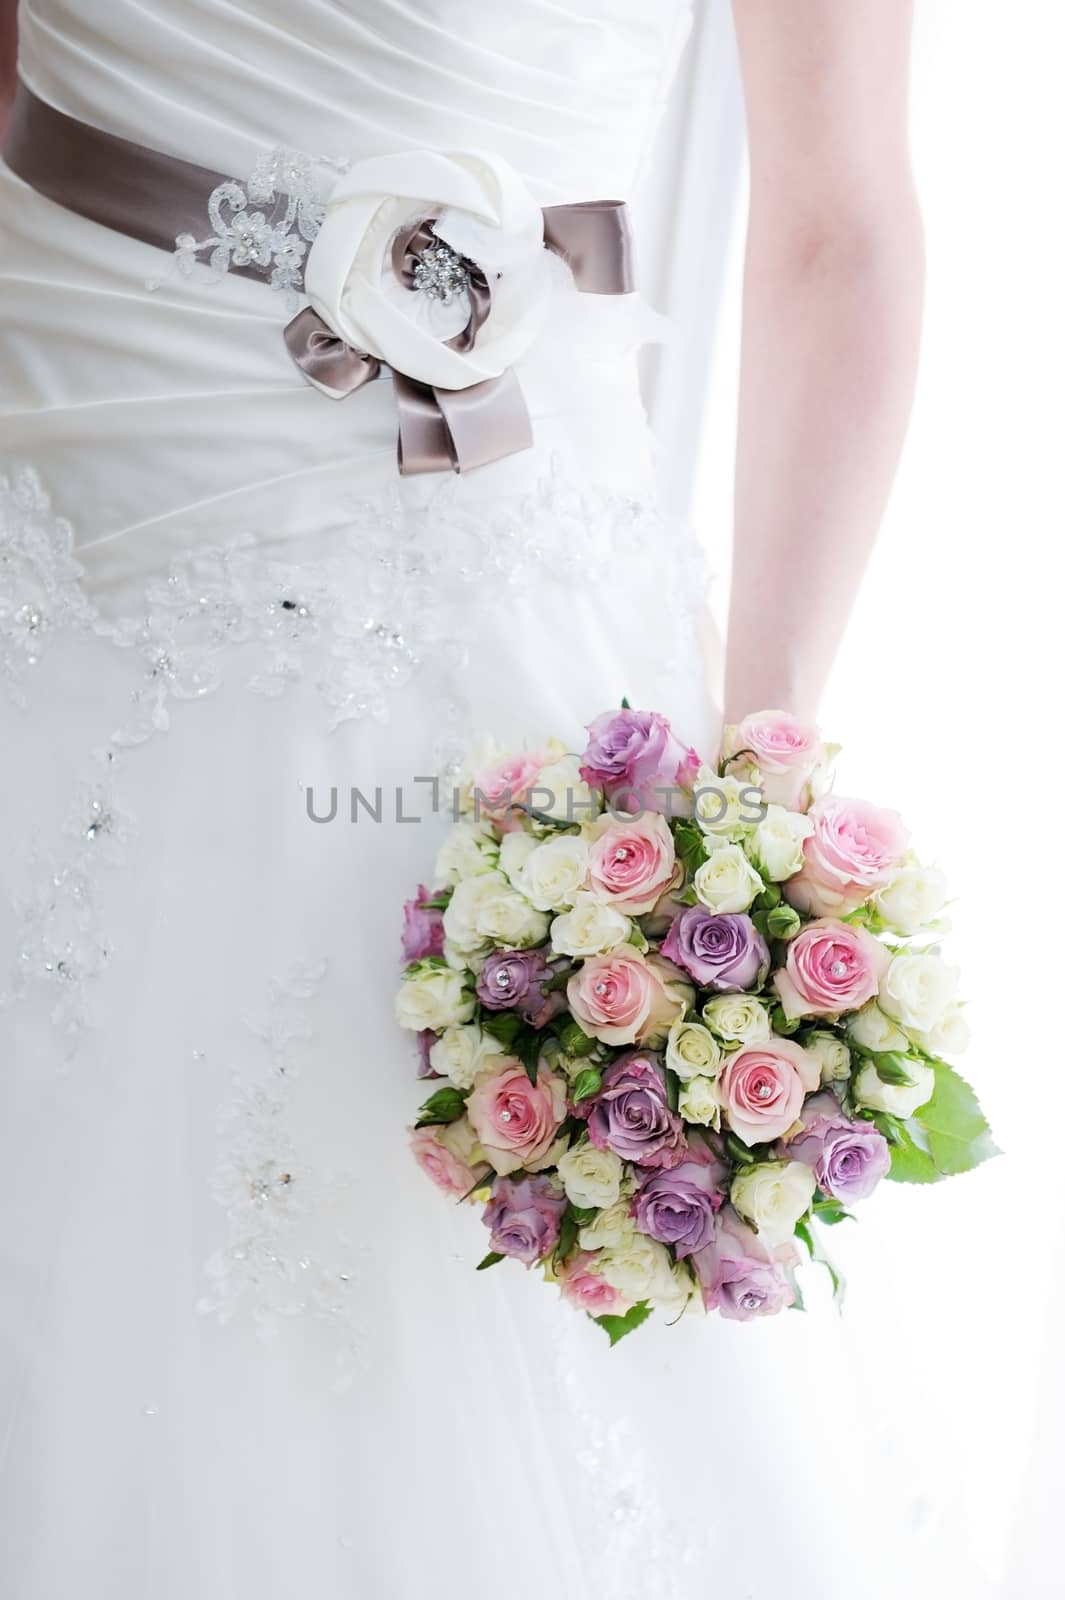 Brides bouquet and dress detail on wedding day